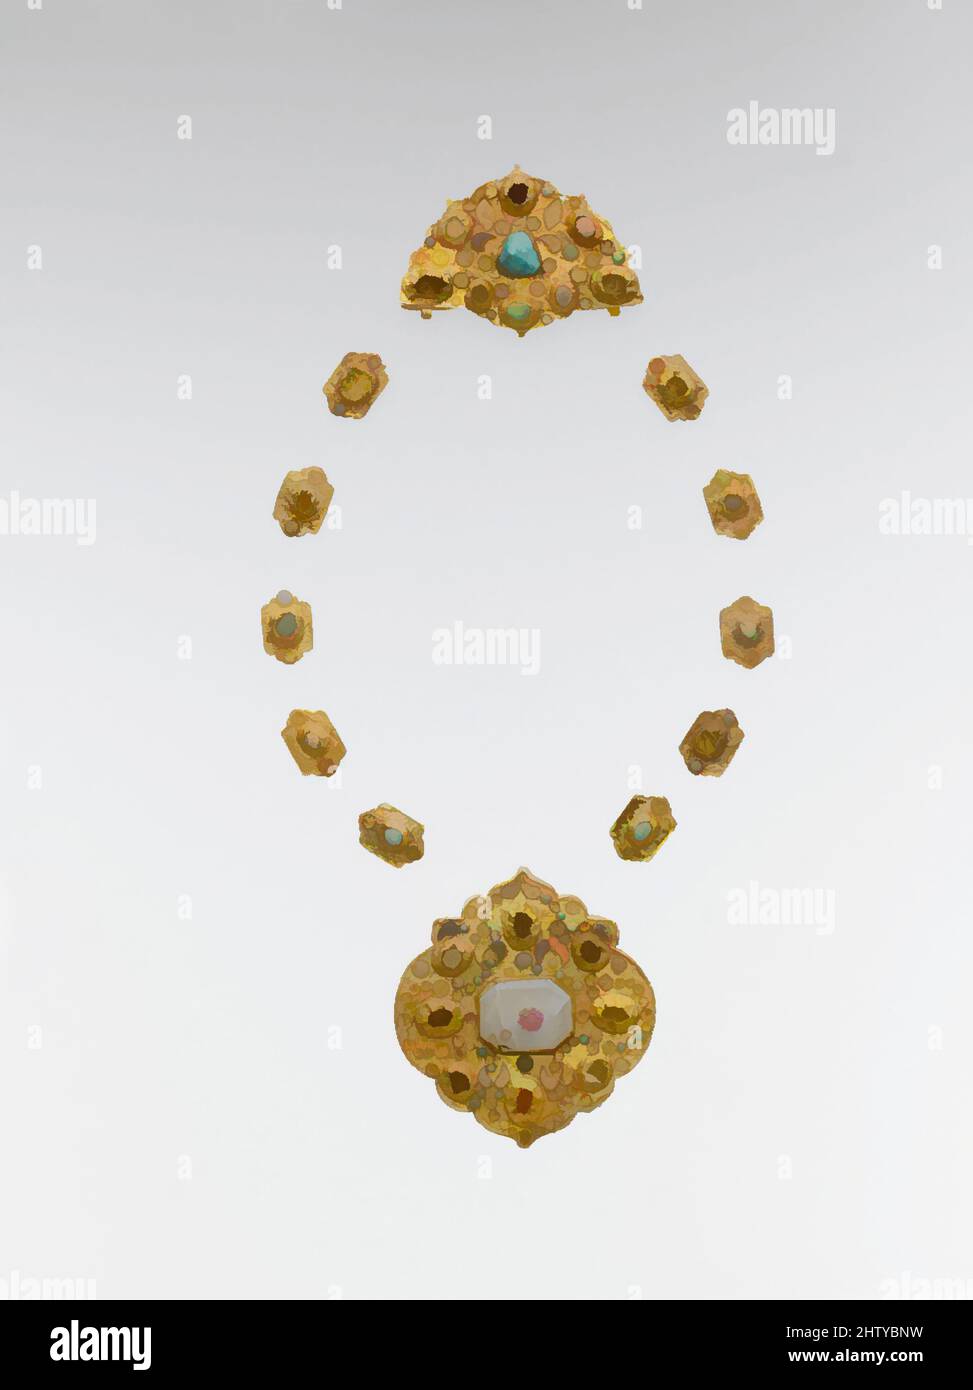 Art inspired by Jewelry Elements, late 14th–16th century, Attributed to Iran or Central Asia, Gold sheet; worked, chased, and set with turquoise, gray chalcedony, and glass, Large medallion: H. 2 7/8 in. (7.3 cm), Jewelry, Few examples of medieval Islamic jewelry survive, leaving, Classic works modernized by Artotop with a splash of modernity. Shapes, color and value, eye-catching visual impact on art. Emotions through freedom of artworks in a contemporary way. A timeless message pursuing a wildly creative new direction. Artists turning to the digital medium and creating the Artotop NFT Stock Photo